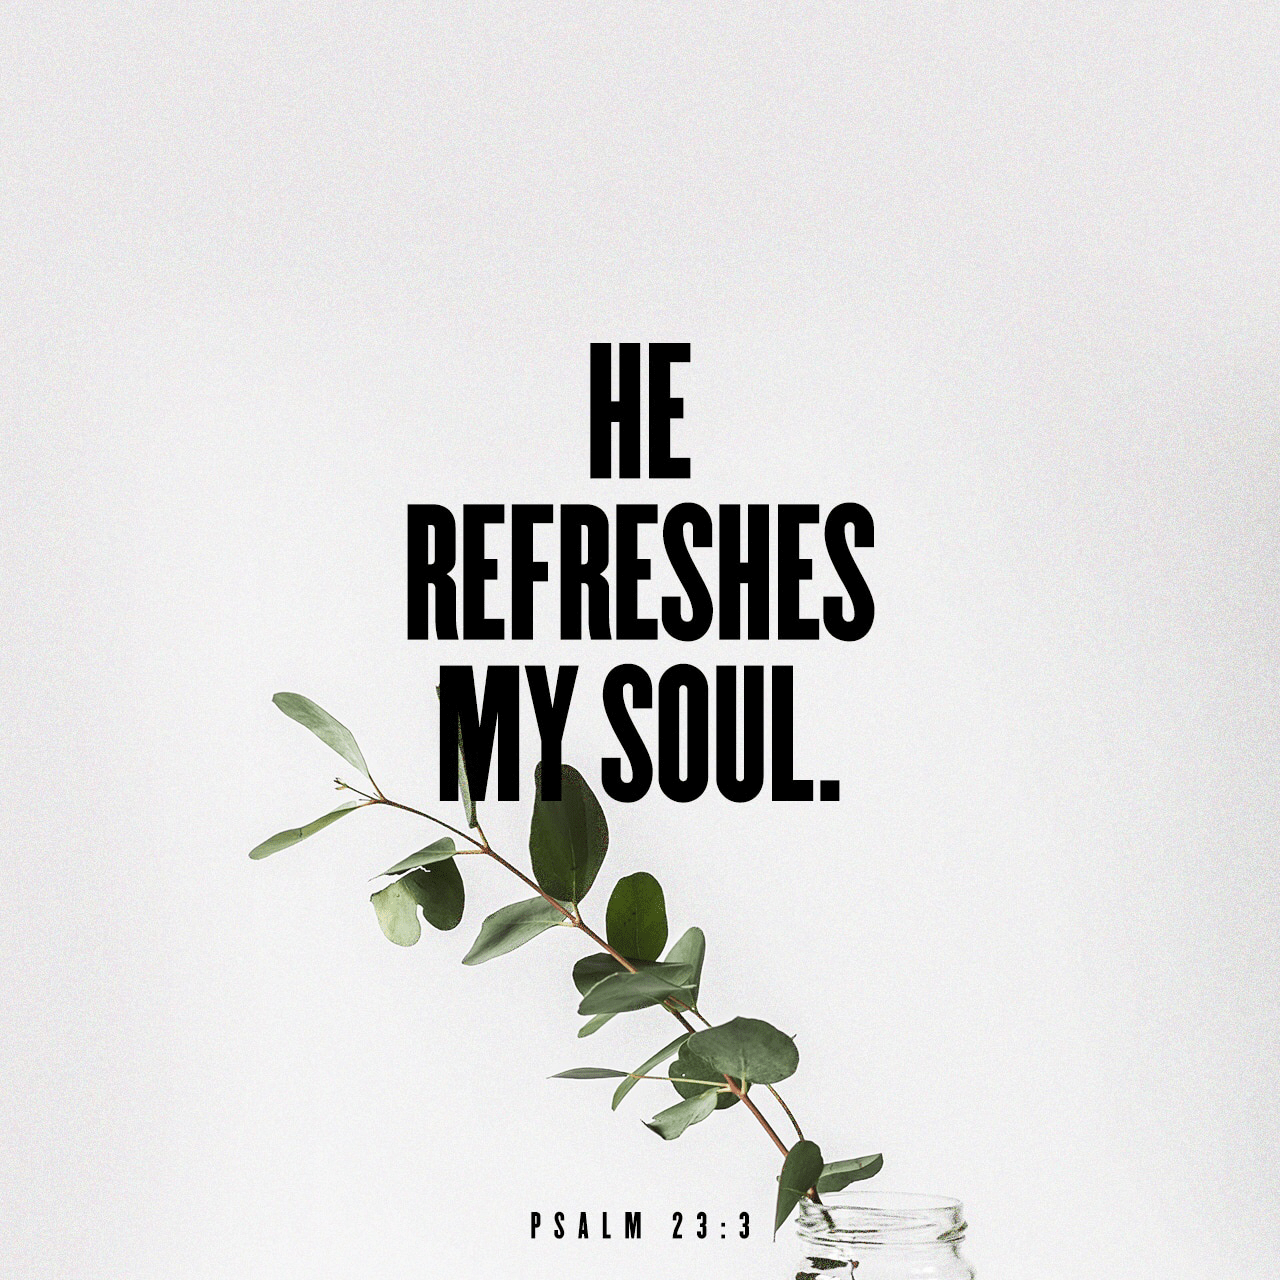 VOTD October 23 - “He restores my soul; He guides me in the paths of righteousness For His name’s sake.” Psalm 23:3